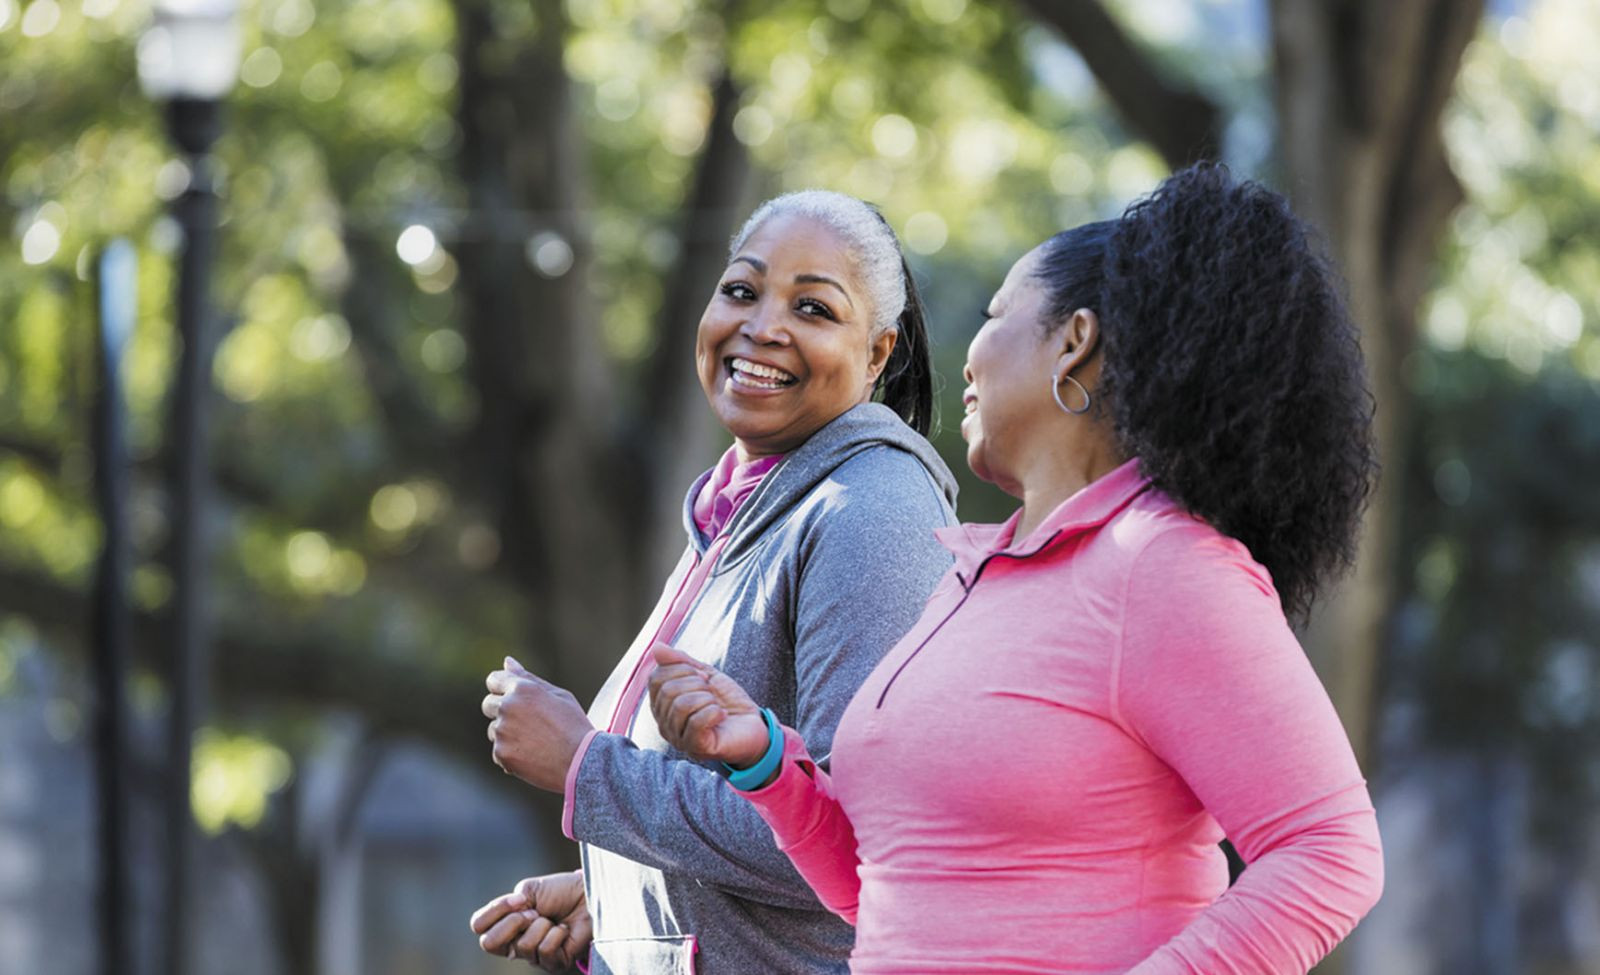 How Does Exercise Improve Mood?